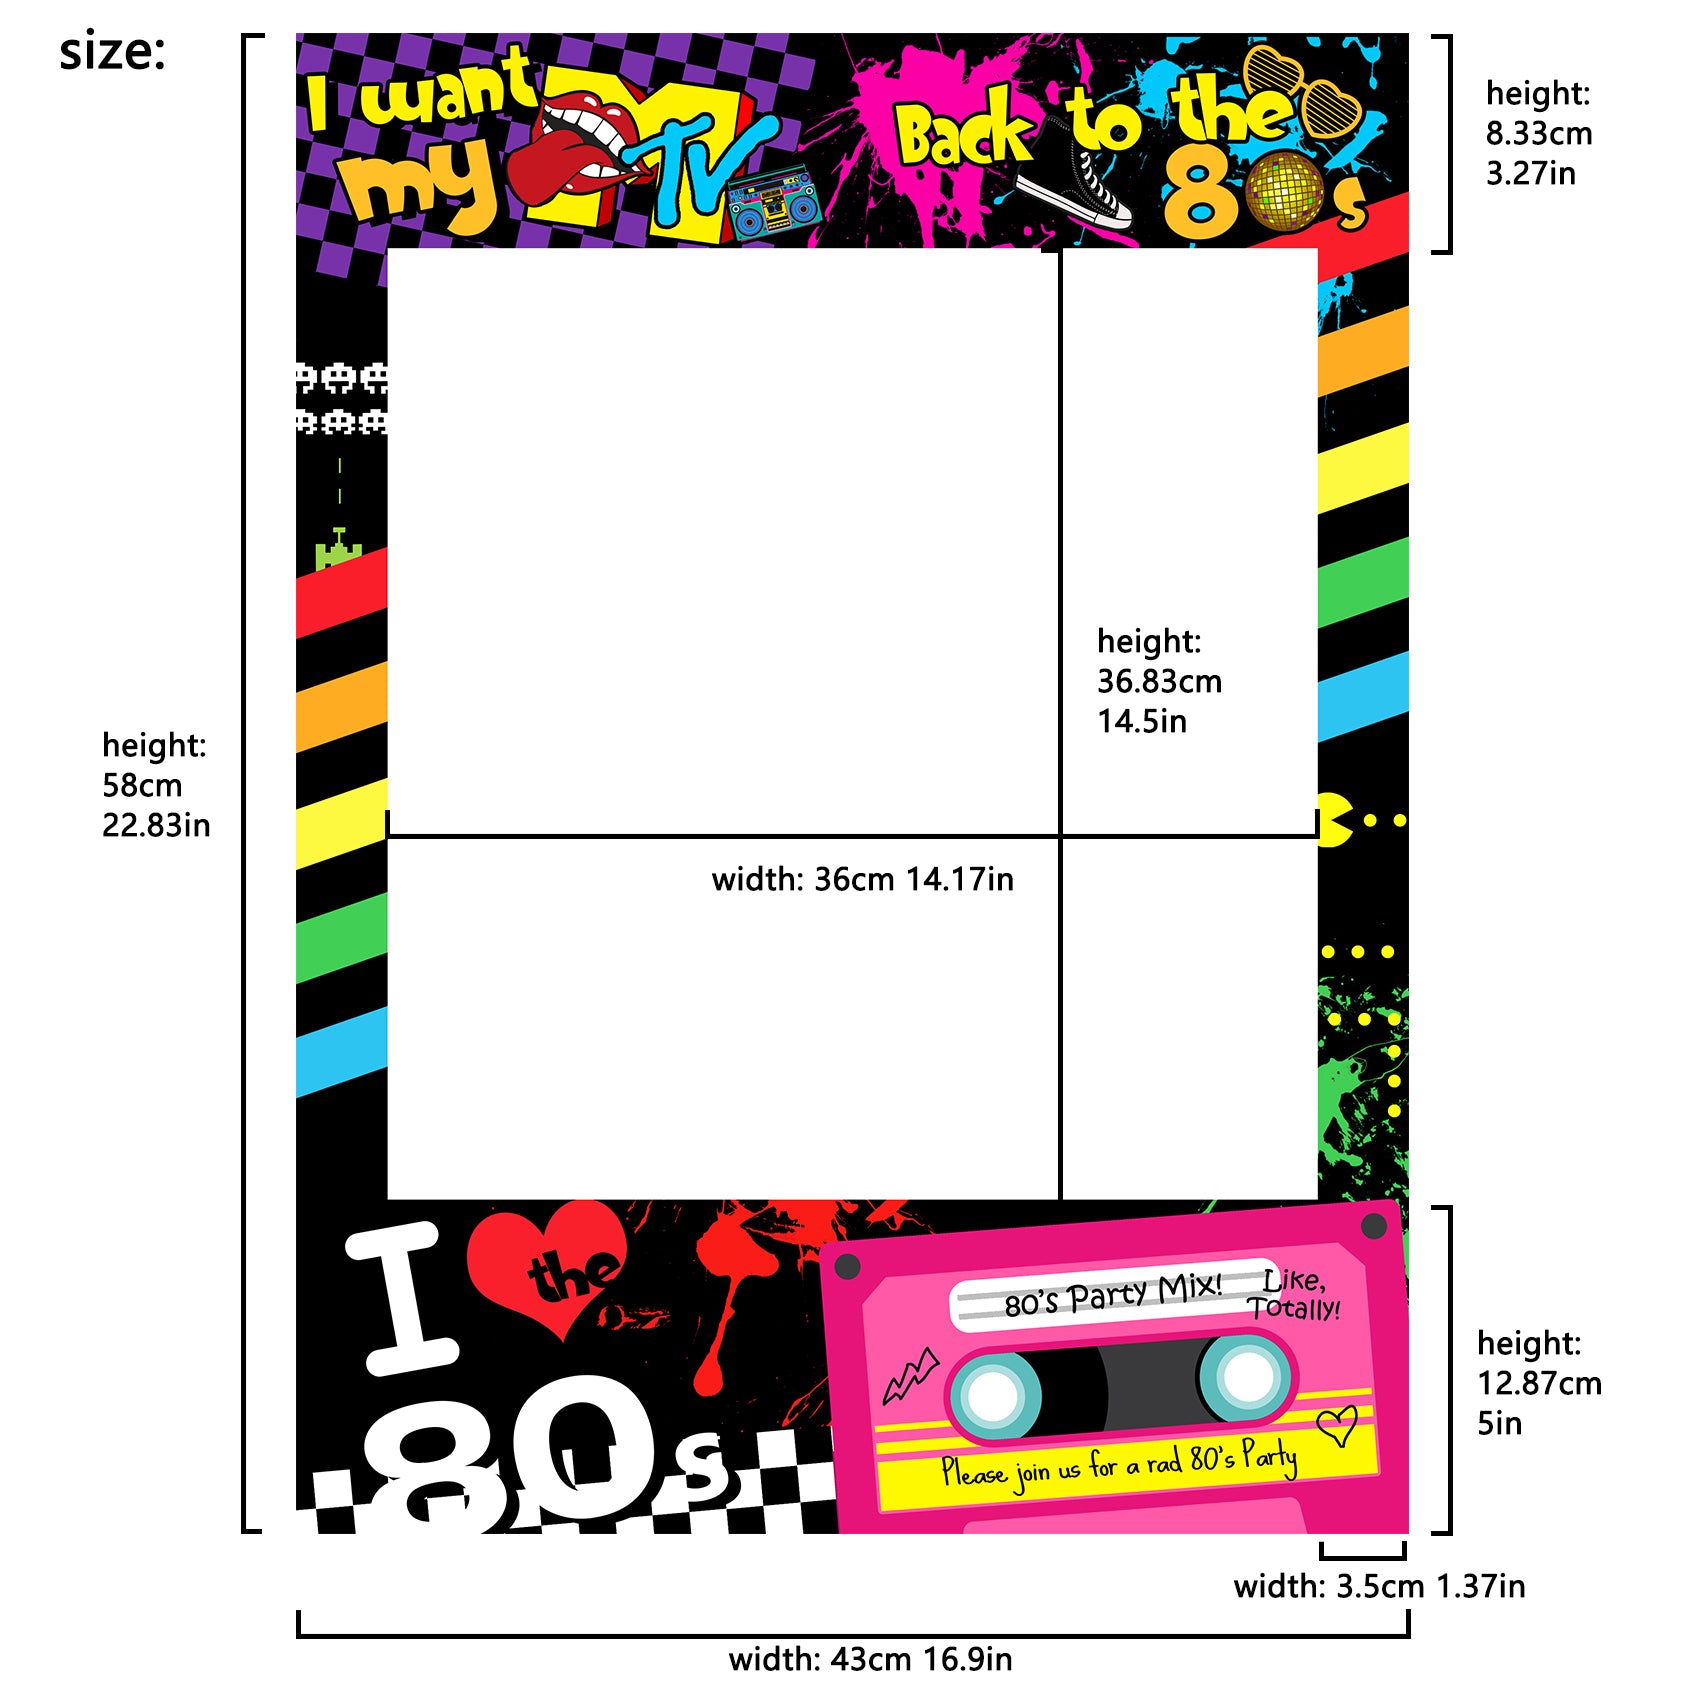 I love 80s Photo Booth Frame Photobooth Props Not Pre-cut for Easy Mounting by Self 23x17inch